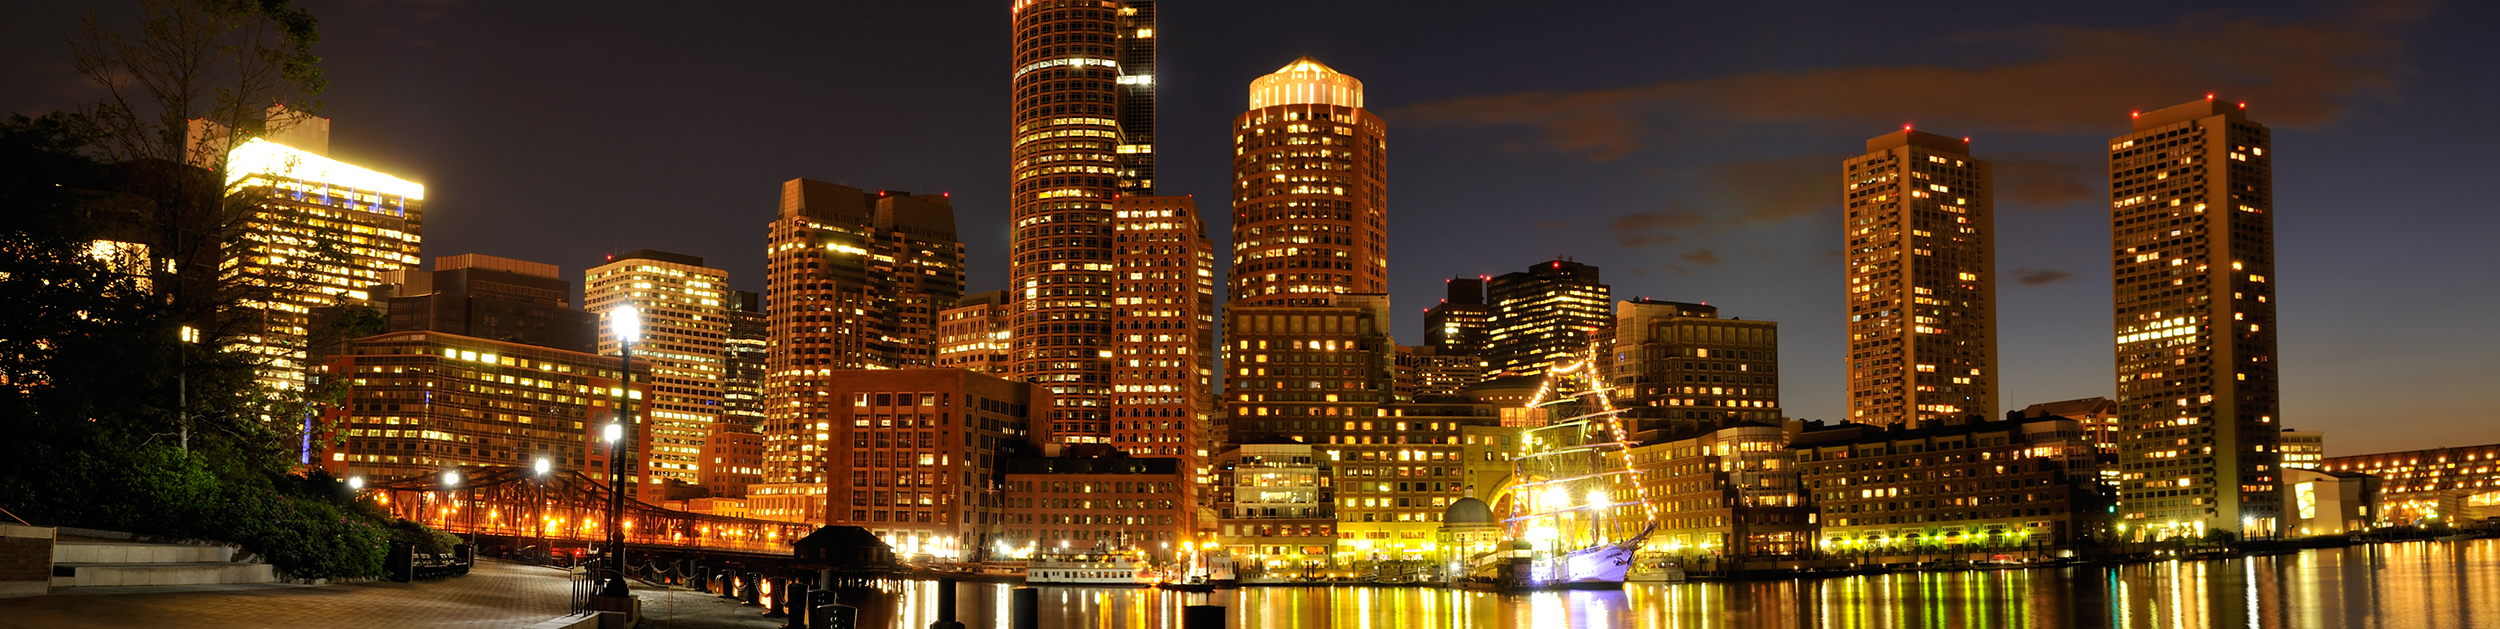 view of Boston MA skyline at night with boat in water